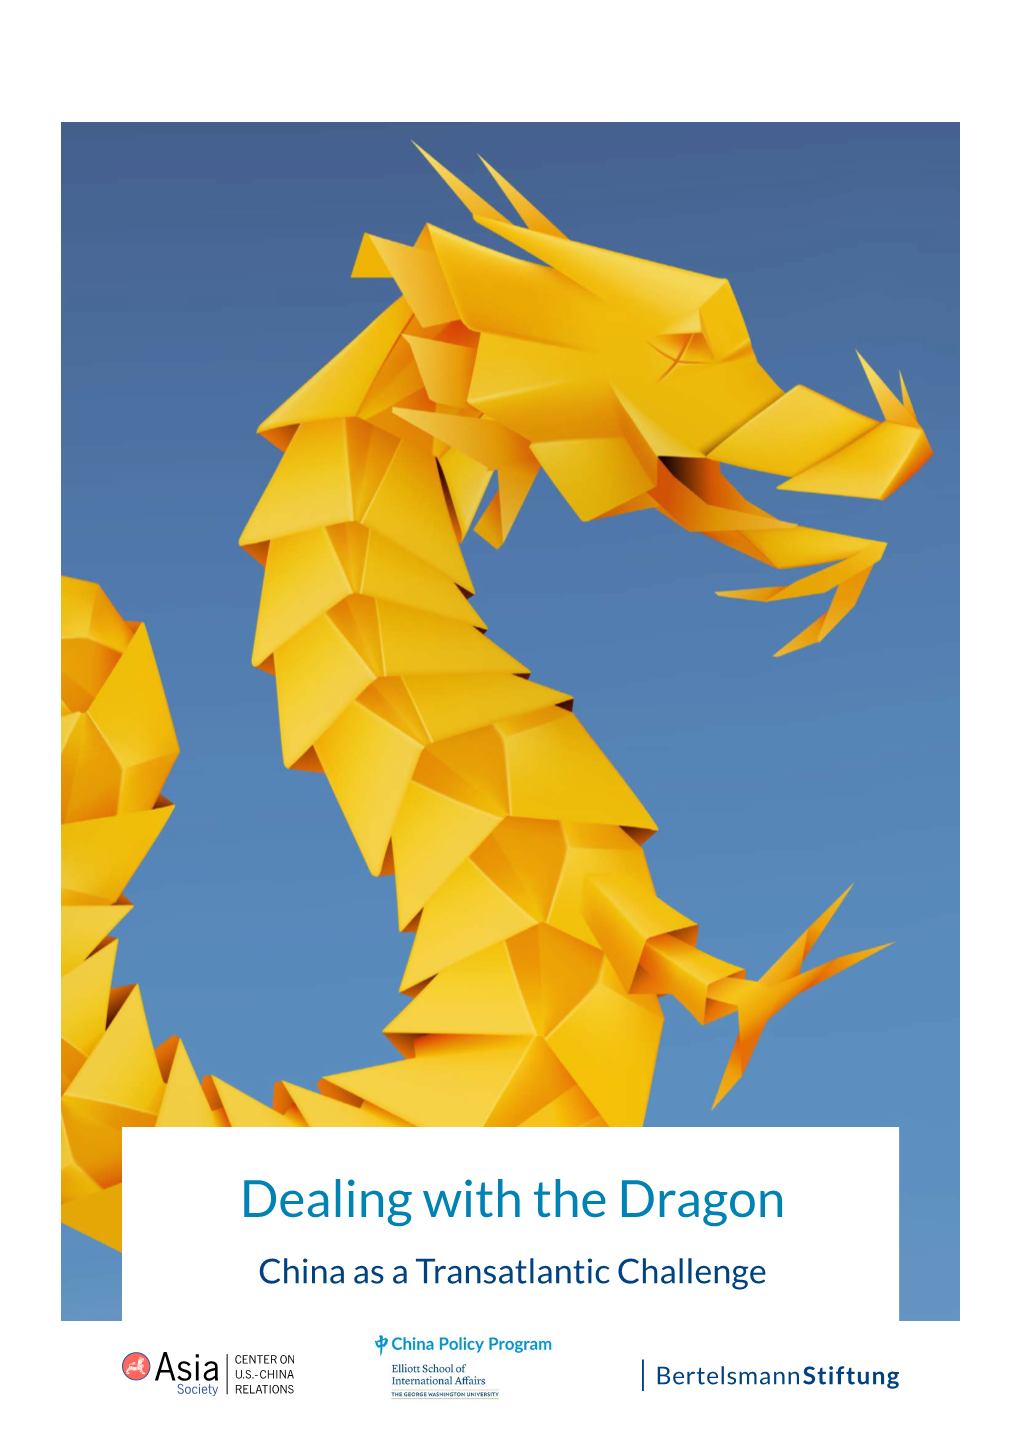 Dealing with the Dragon: China As a Transatlantic Challenge